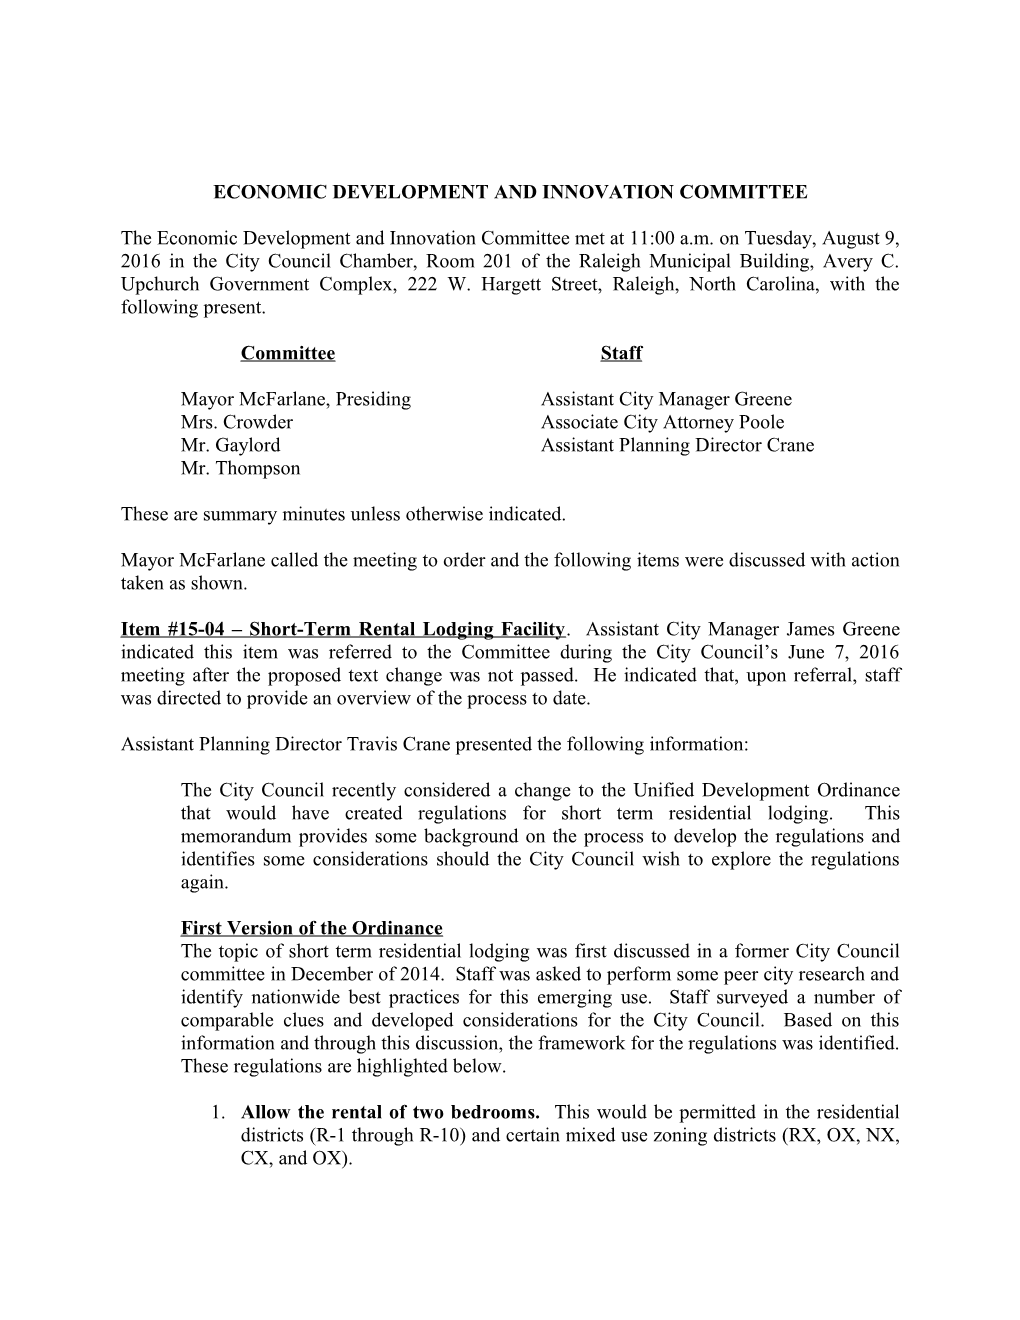 City of Raleigh Economic Development & Innovation Committee Minutes - 08/09/2016